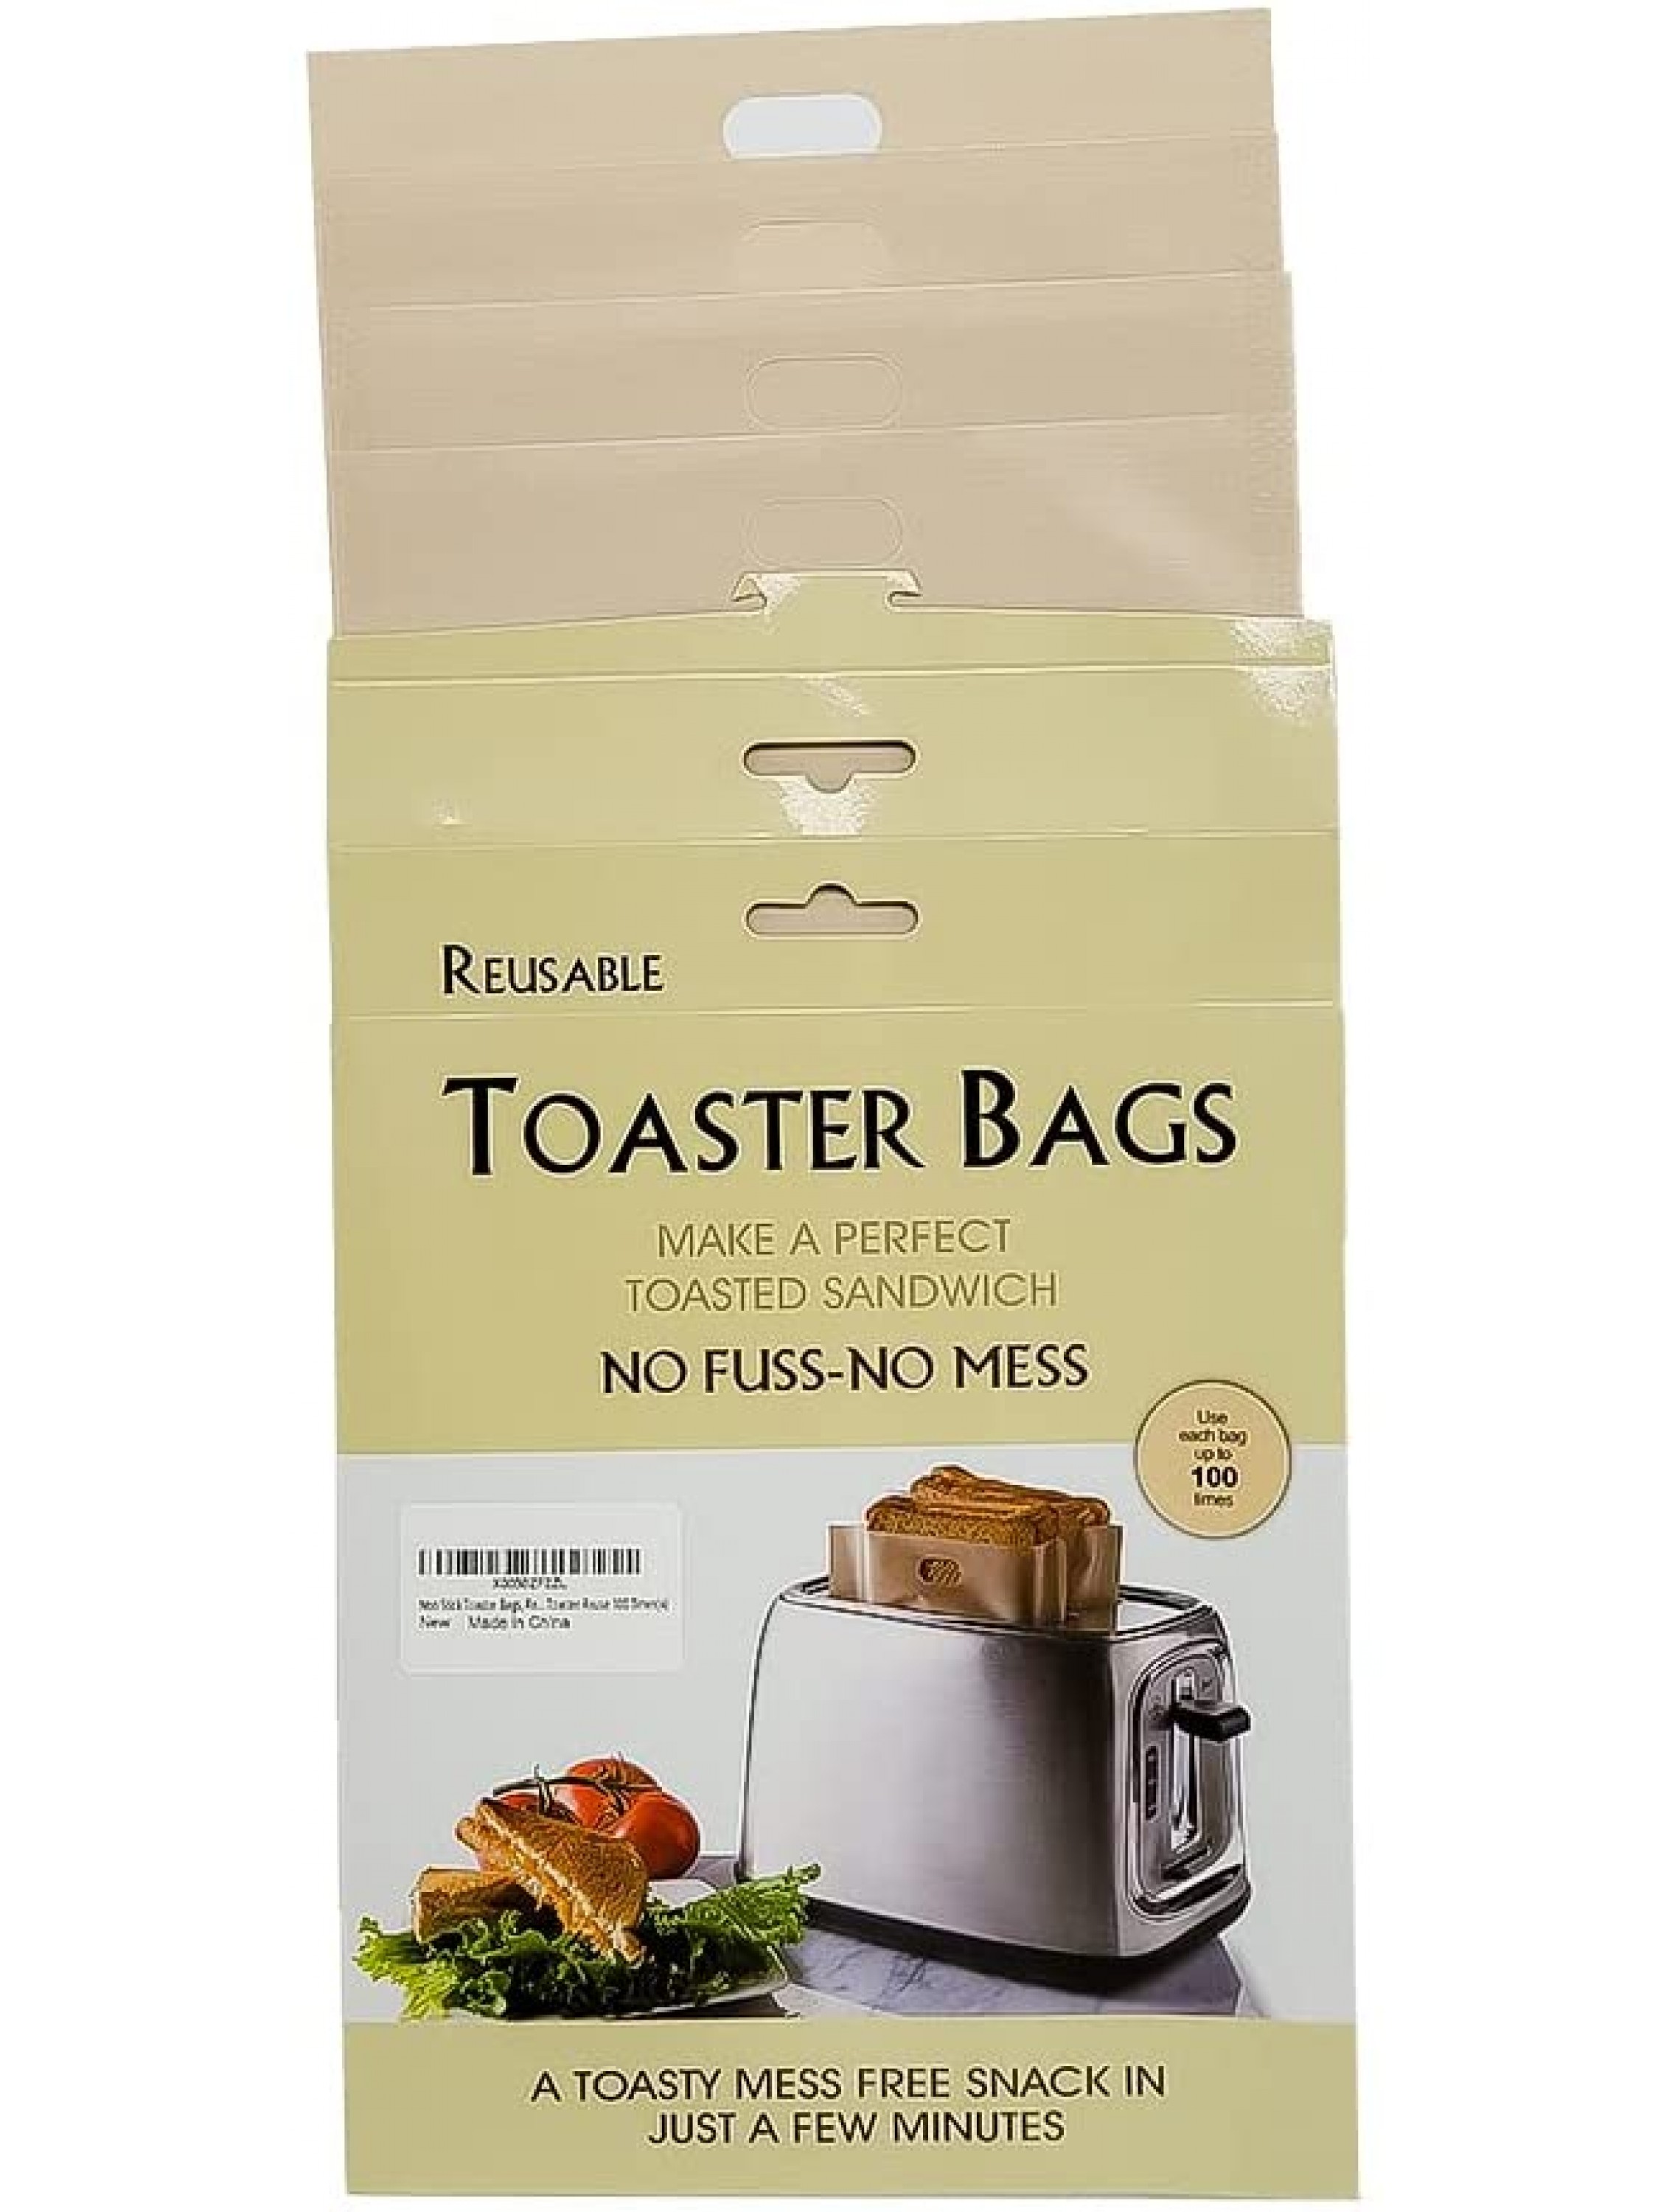 BoKiloh Non Stick Toaster Bags 6.7''x7.5'' 4PCS Easy to Clean Perfect For Sandwiches Hot Dogs Chicken Fish Vegetables Panini & Garlic Toast Suit for Microwave Grill Toaster Reuse 100 Times - B9TJ635JN